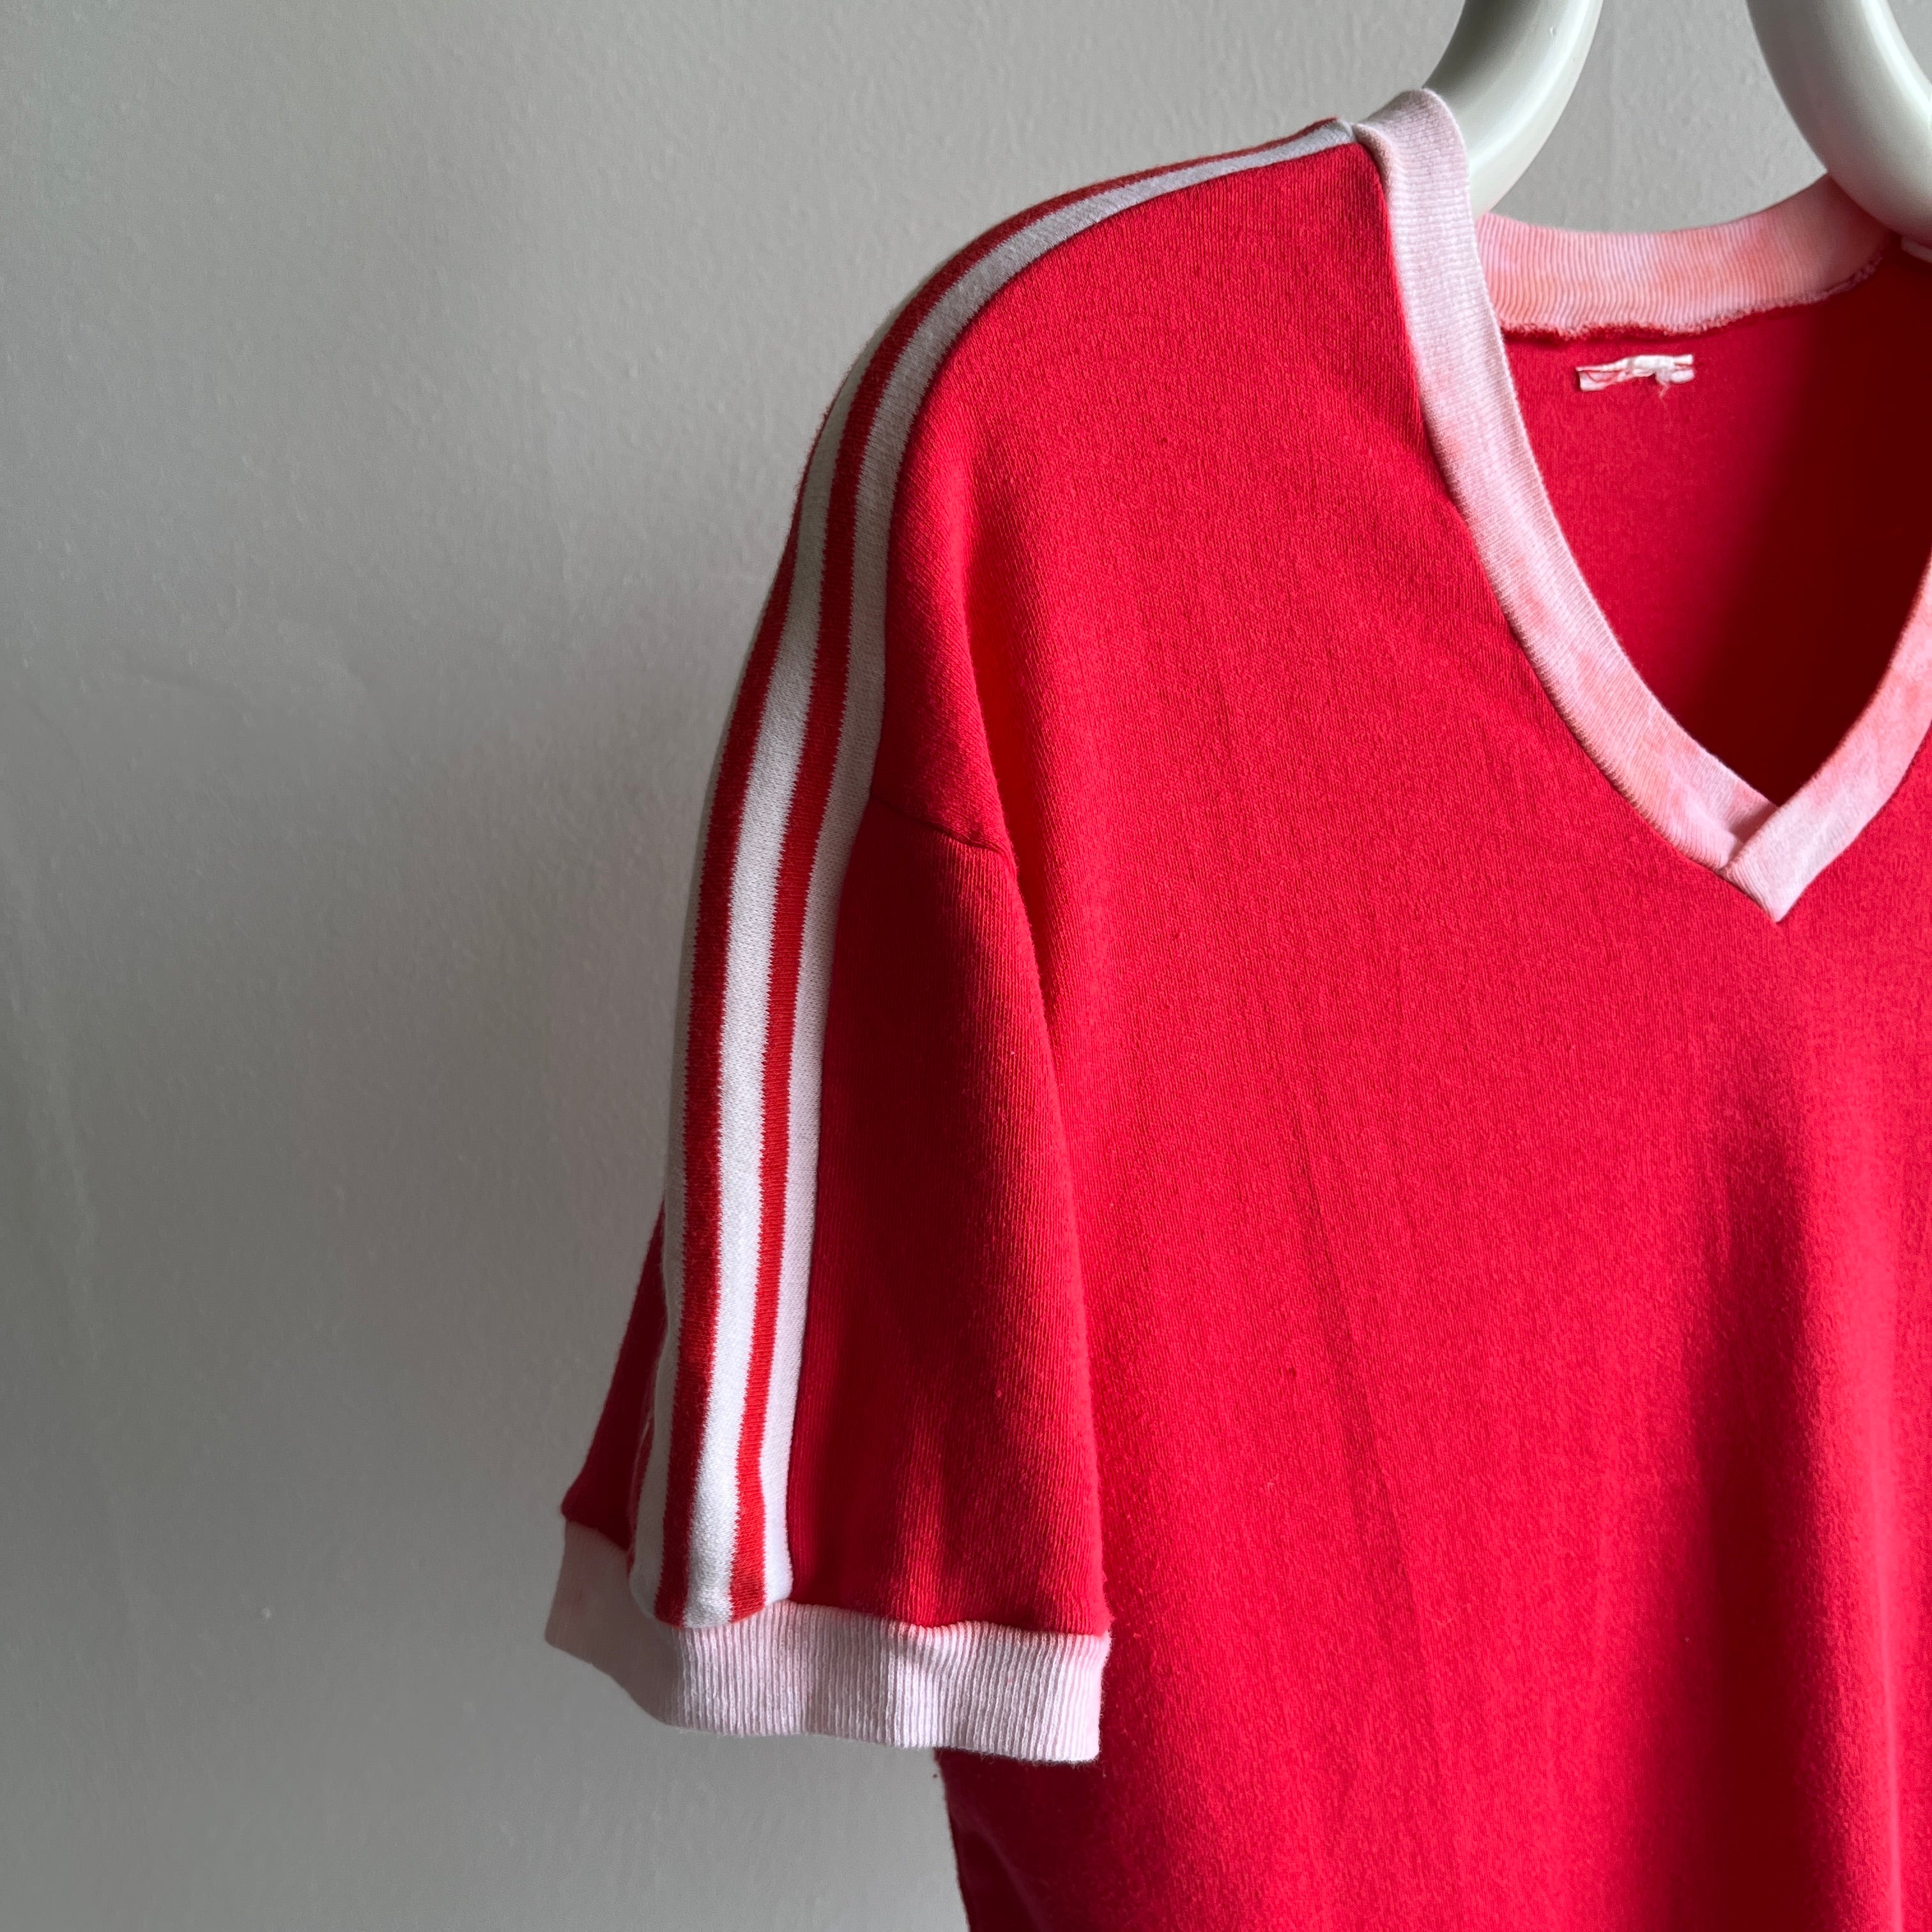 1970/80s Re V-Neck Ring T-SHirt with Shoulder Striping - Jersey Knit